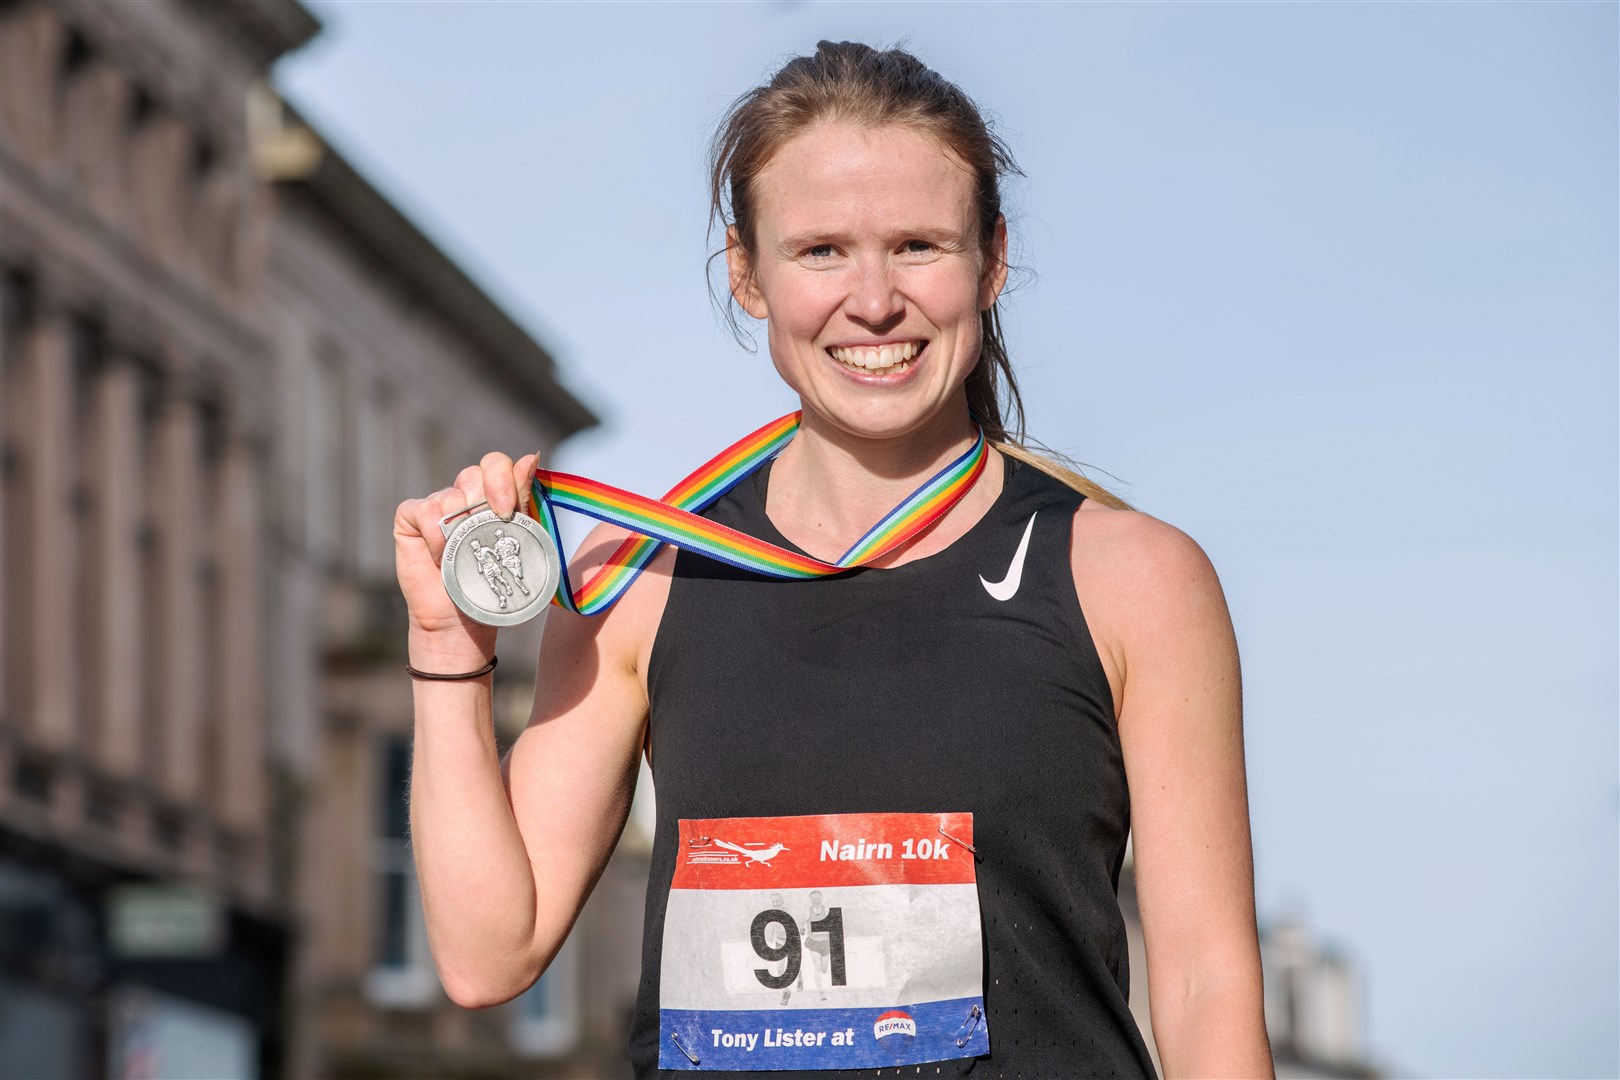 Catriona Fraser won the women's title in the Nairn 10K. Picture: Daniel Forysth.